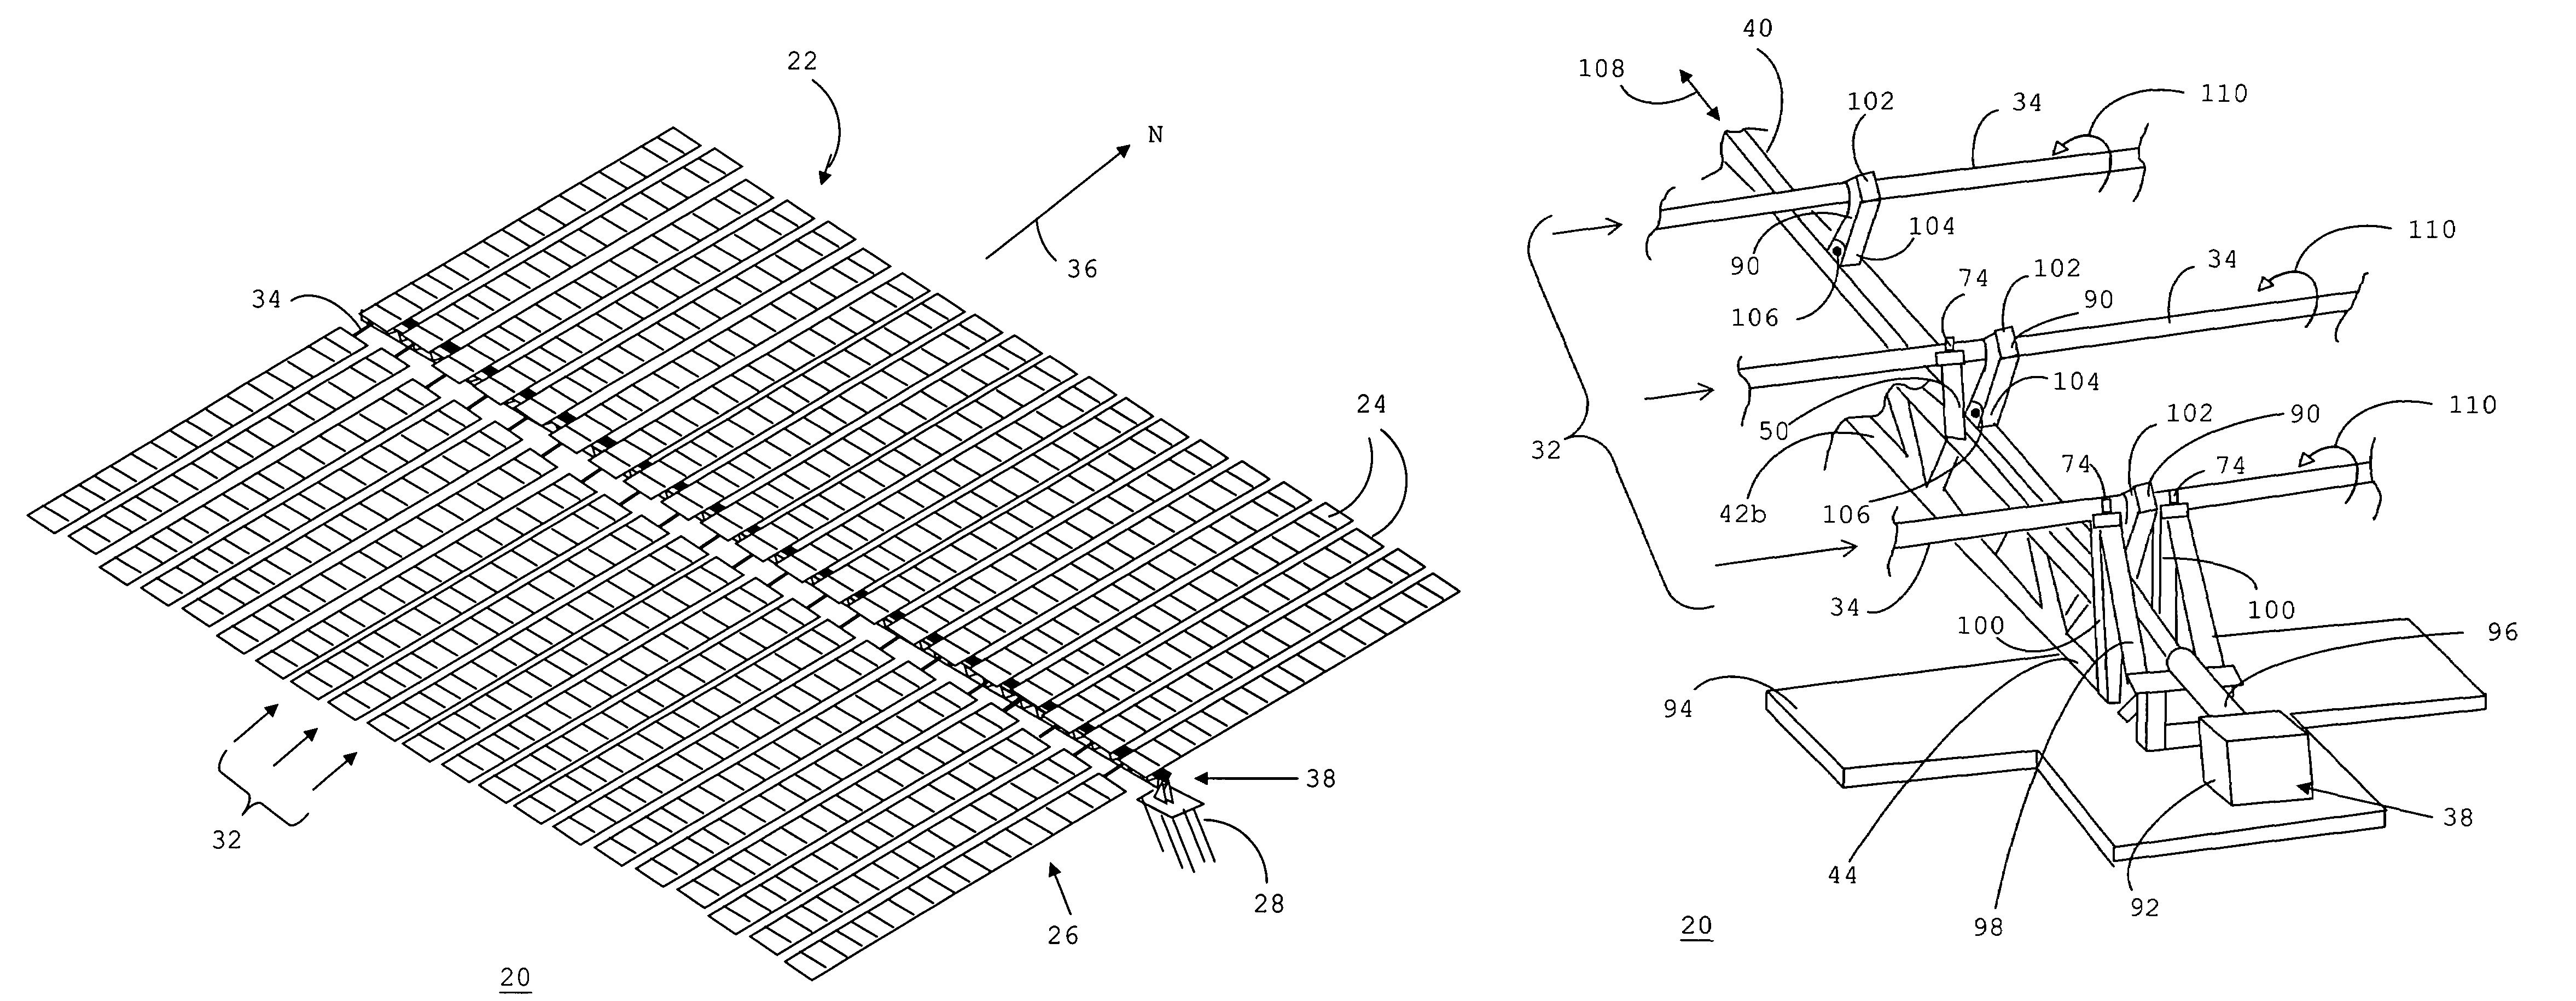 Structure for supporting energy conversion modules and solar energy collection system